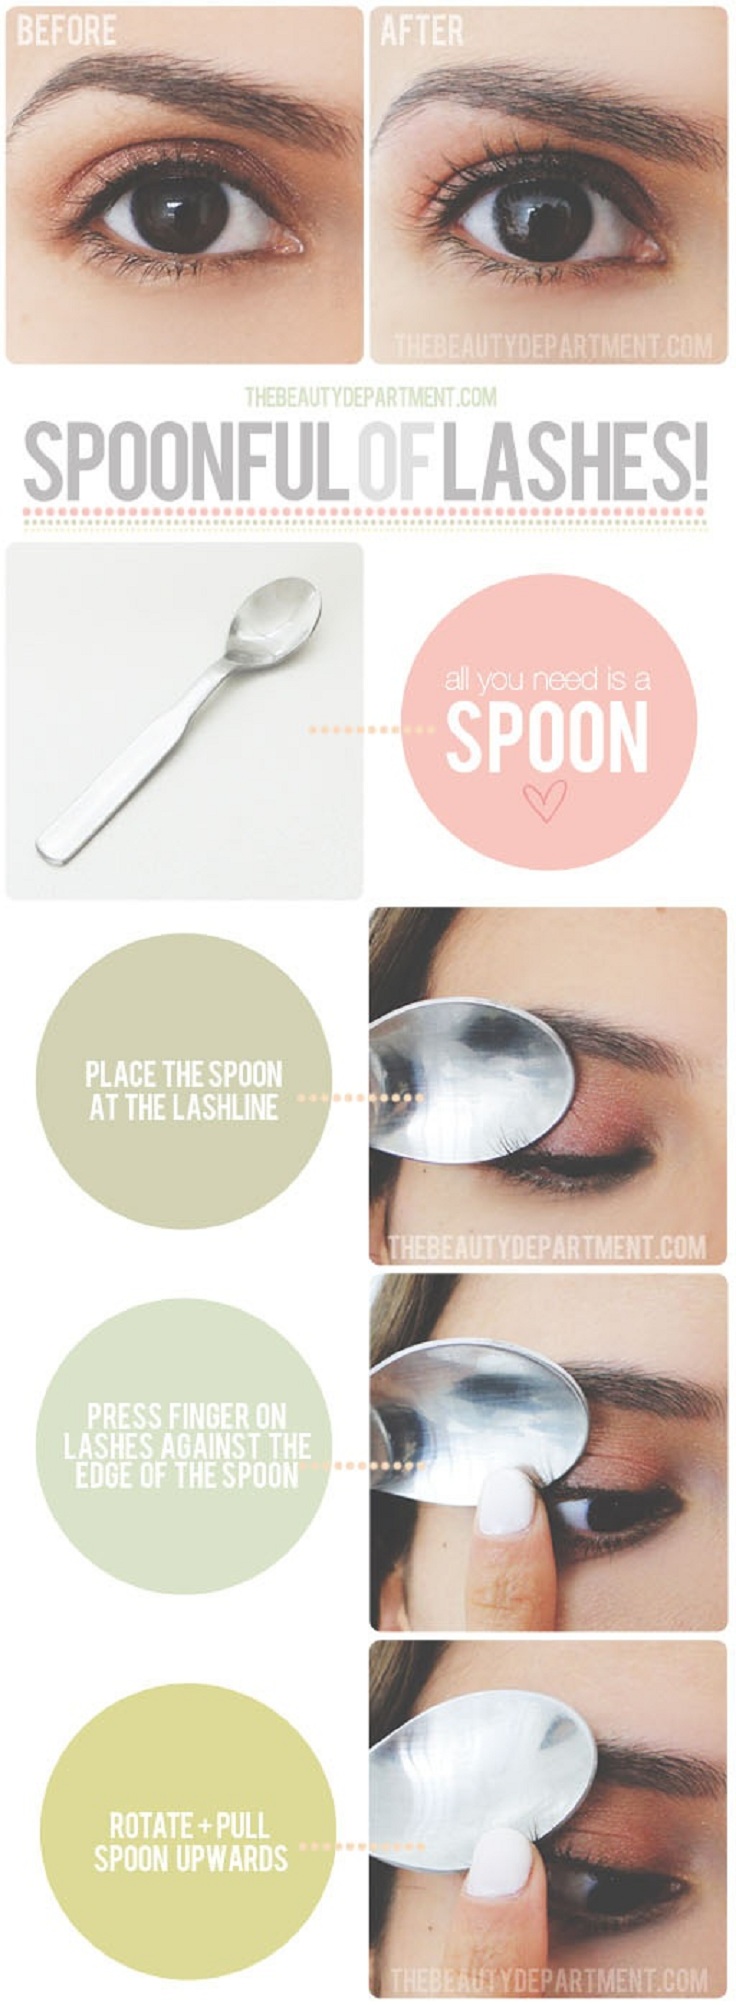 13 Beauty Tricks Every Woman Must Know